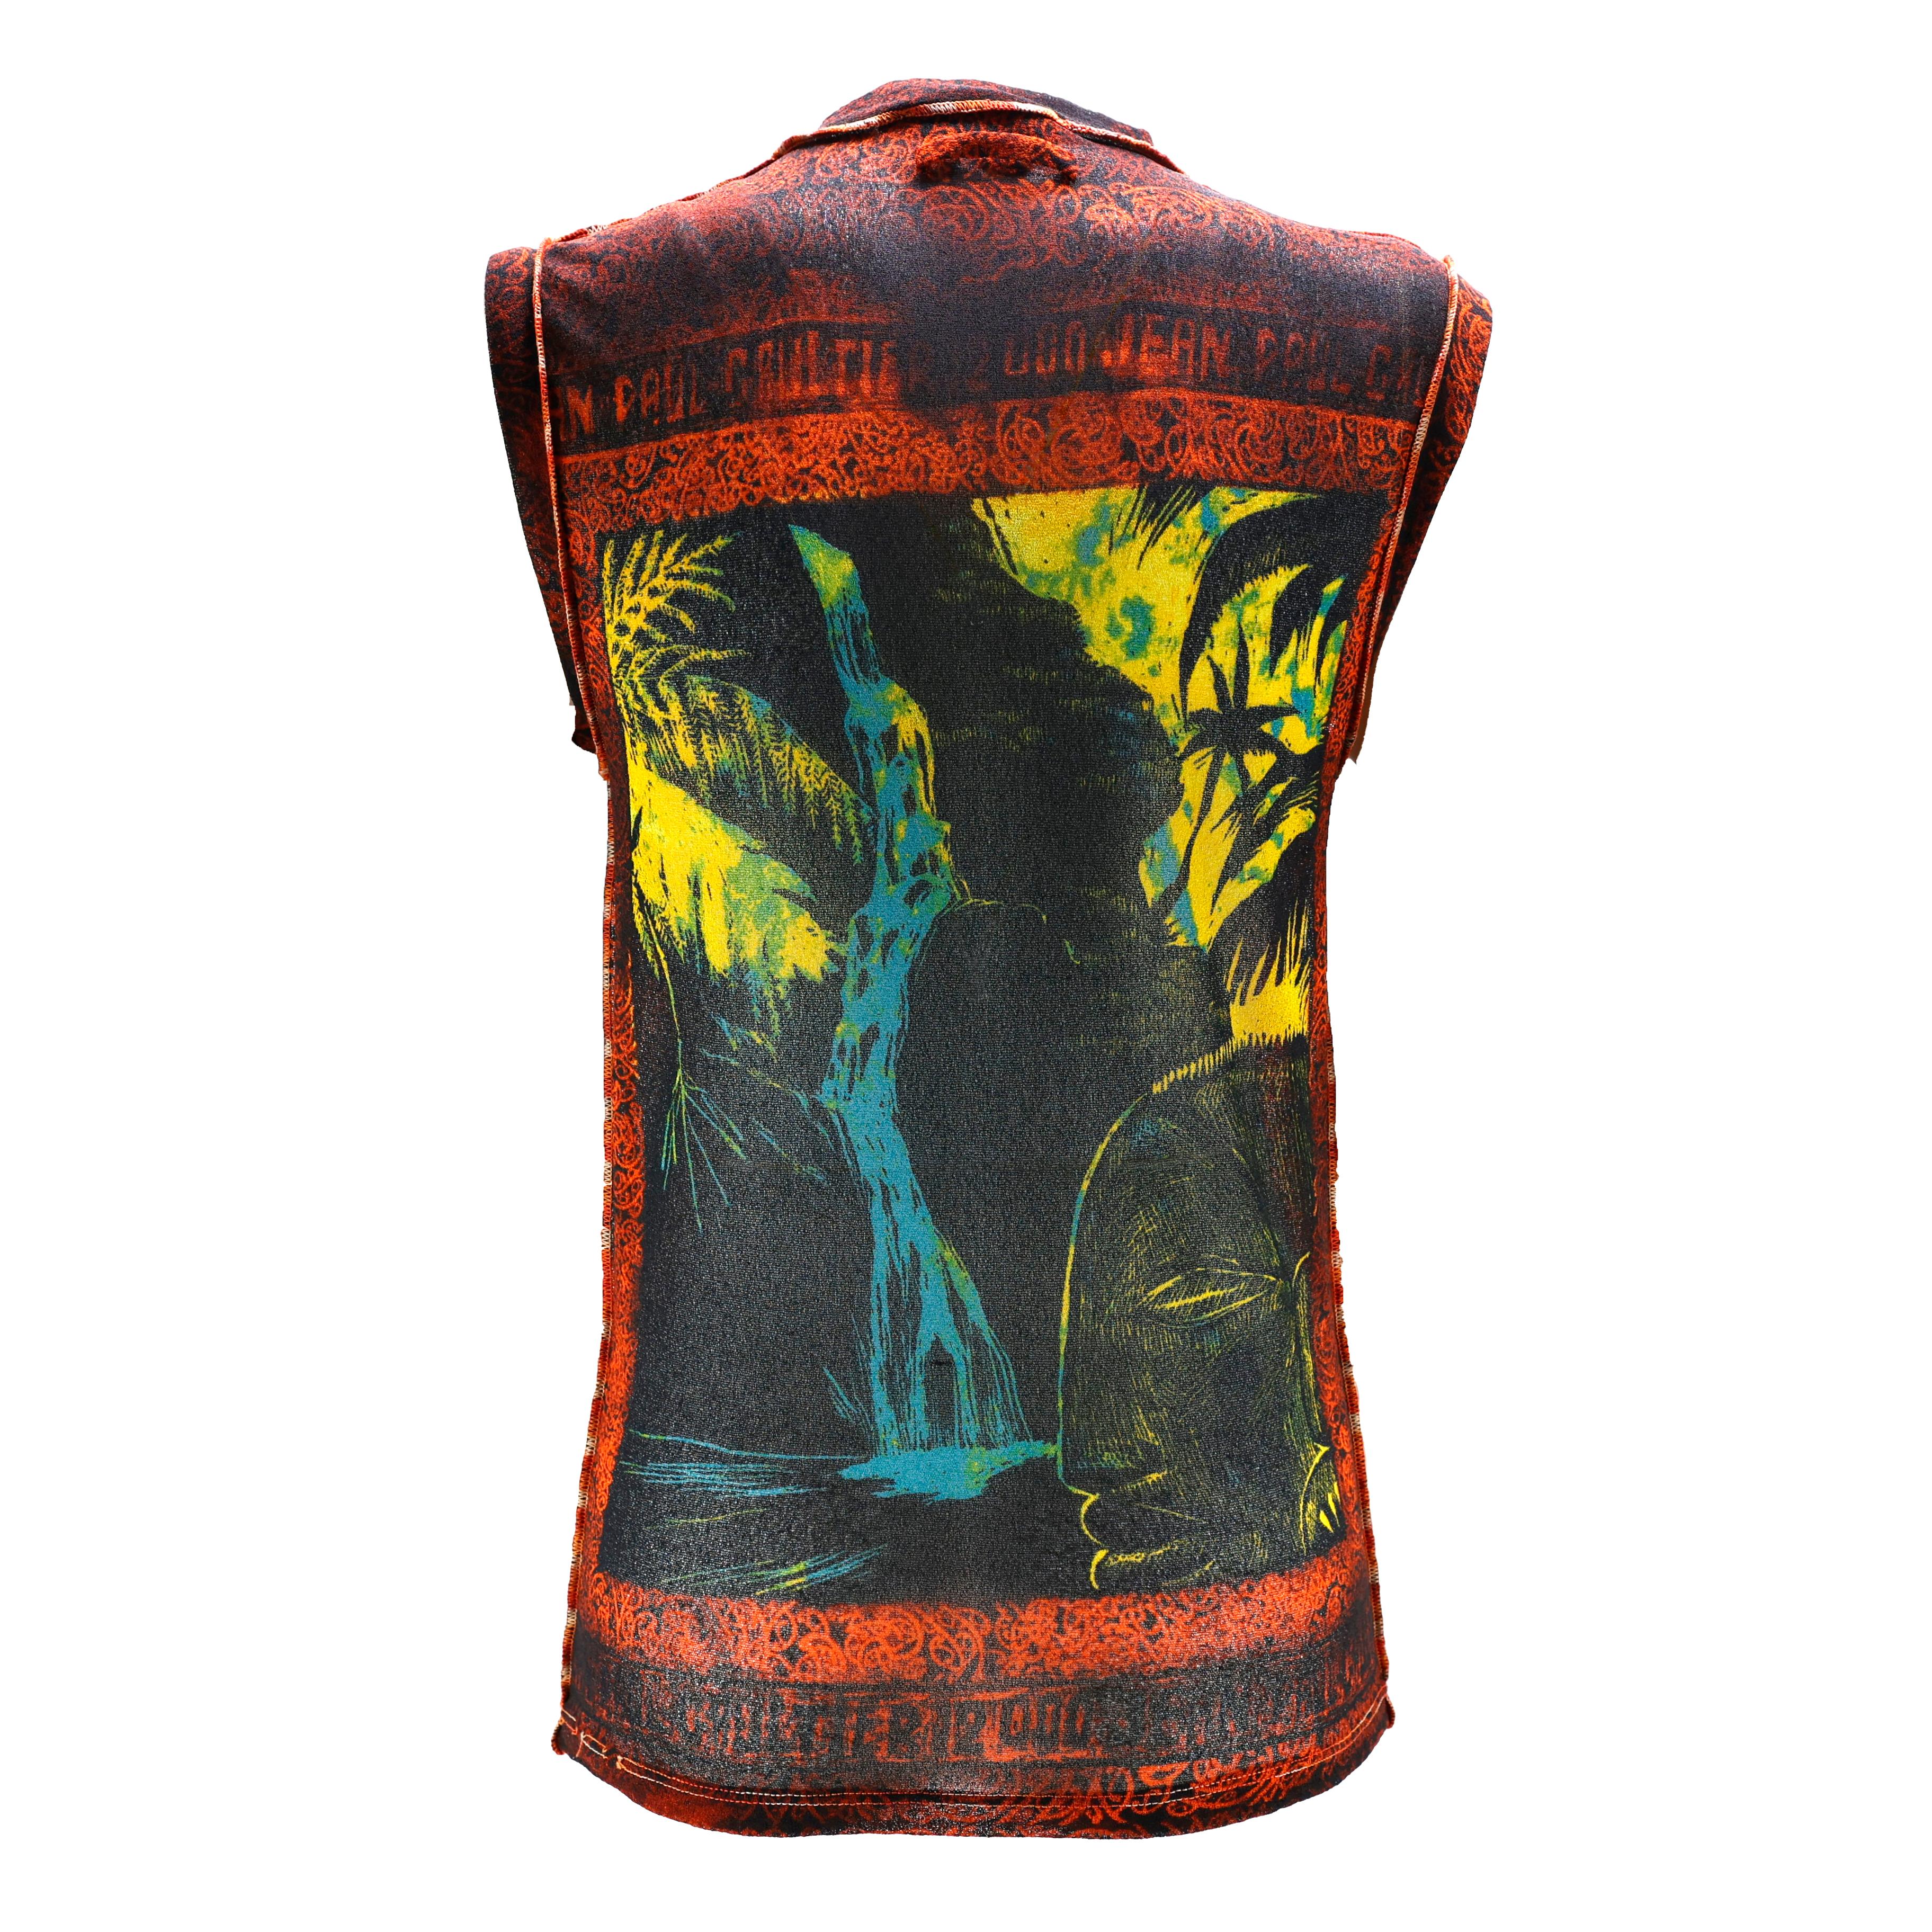 Jean Paul Gaultier top in mesh multicoloured waterfall / tribal print. Size L.

Condition:
Really good.